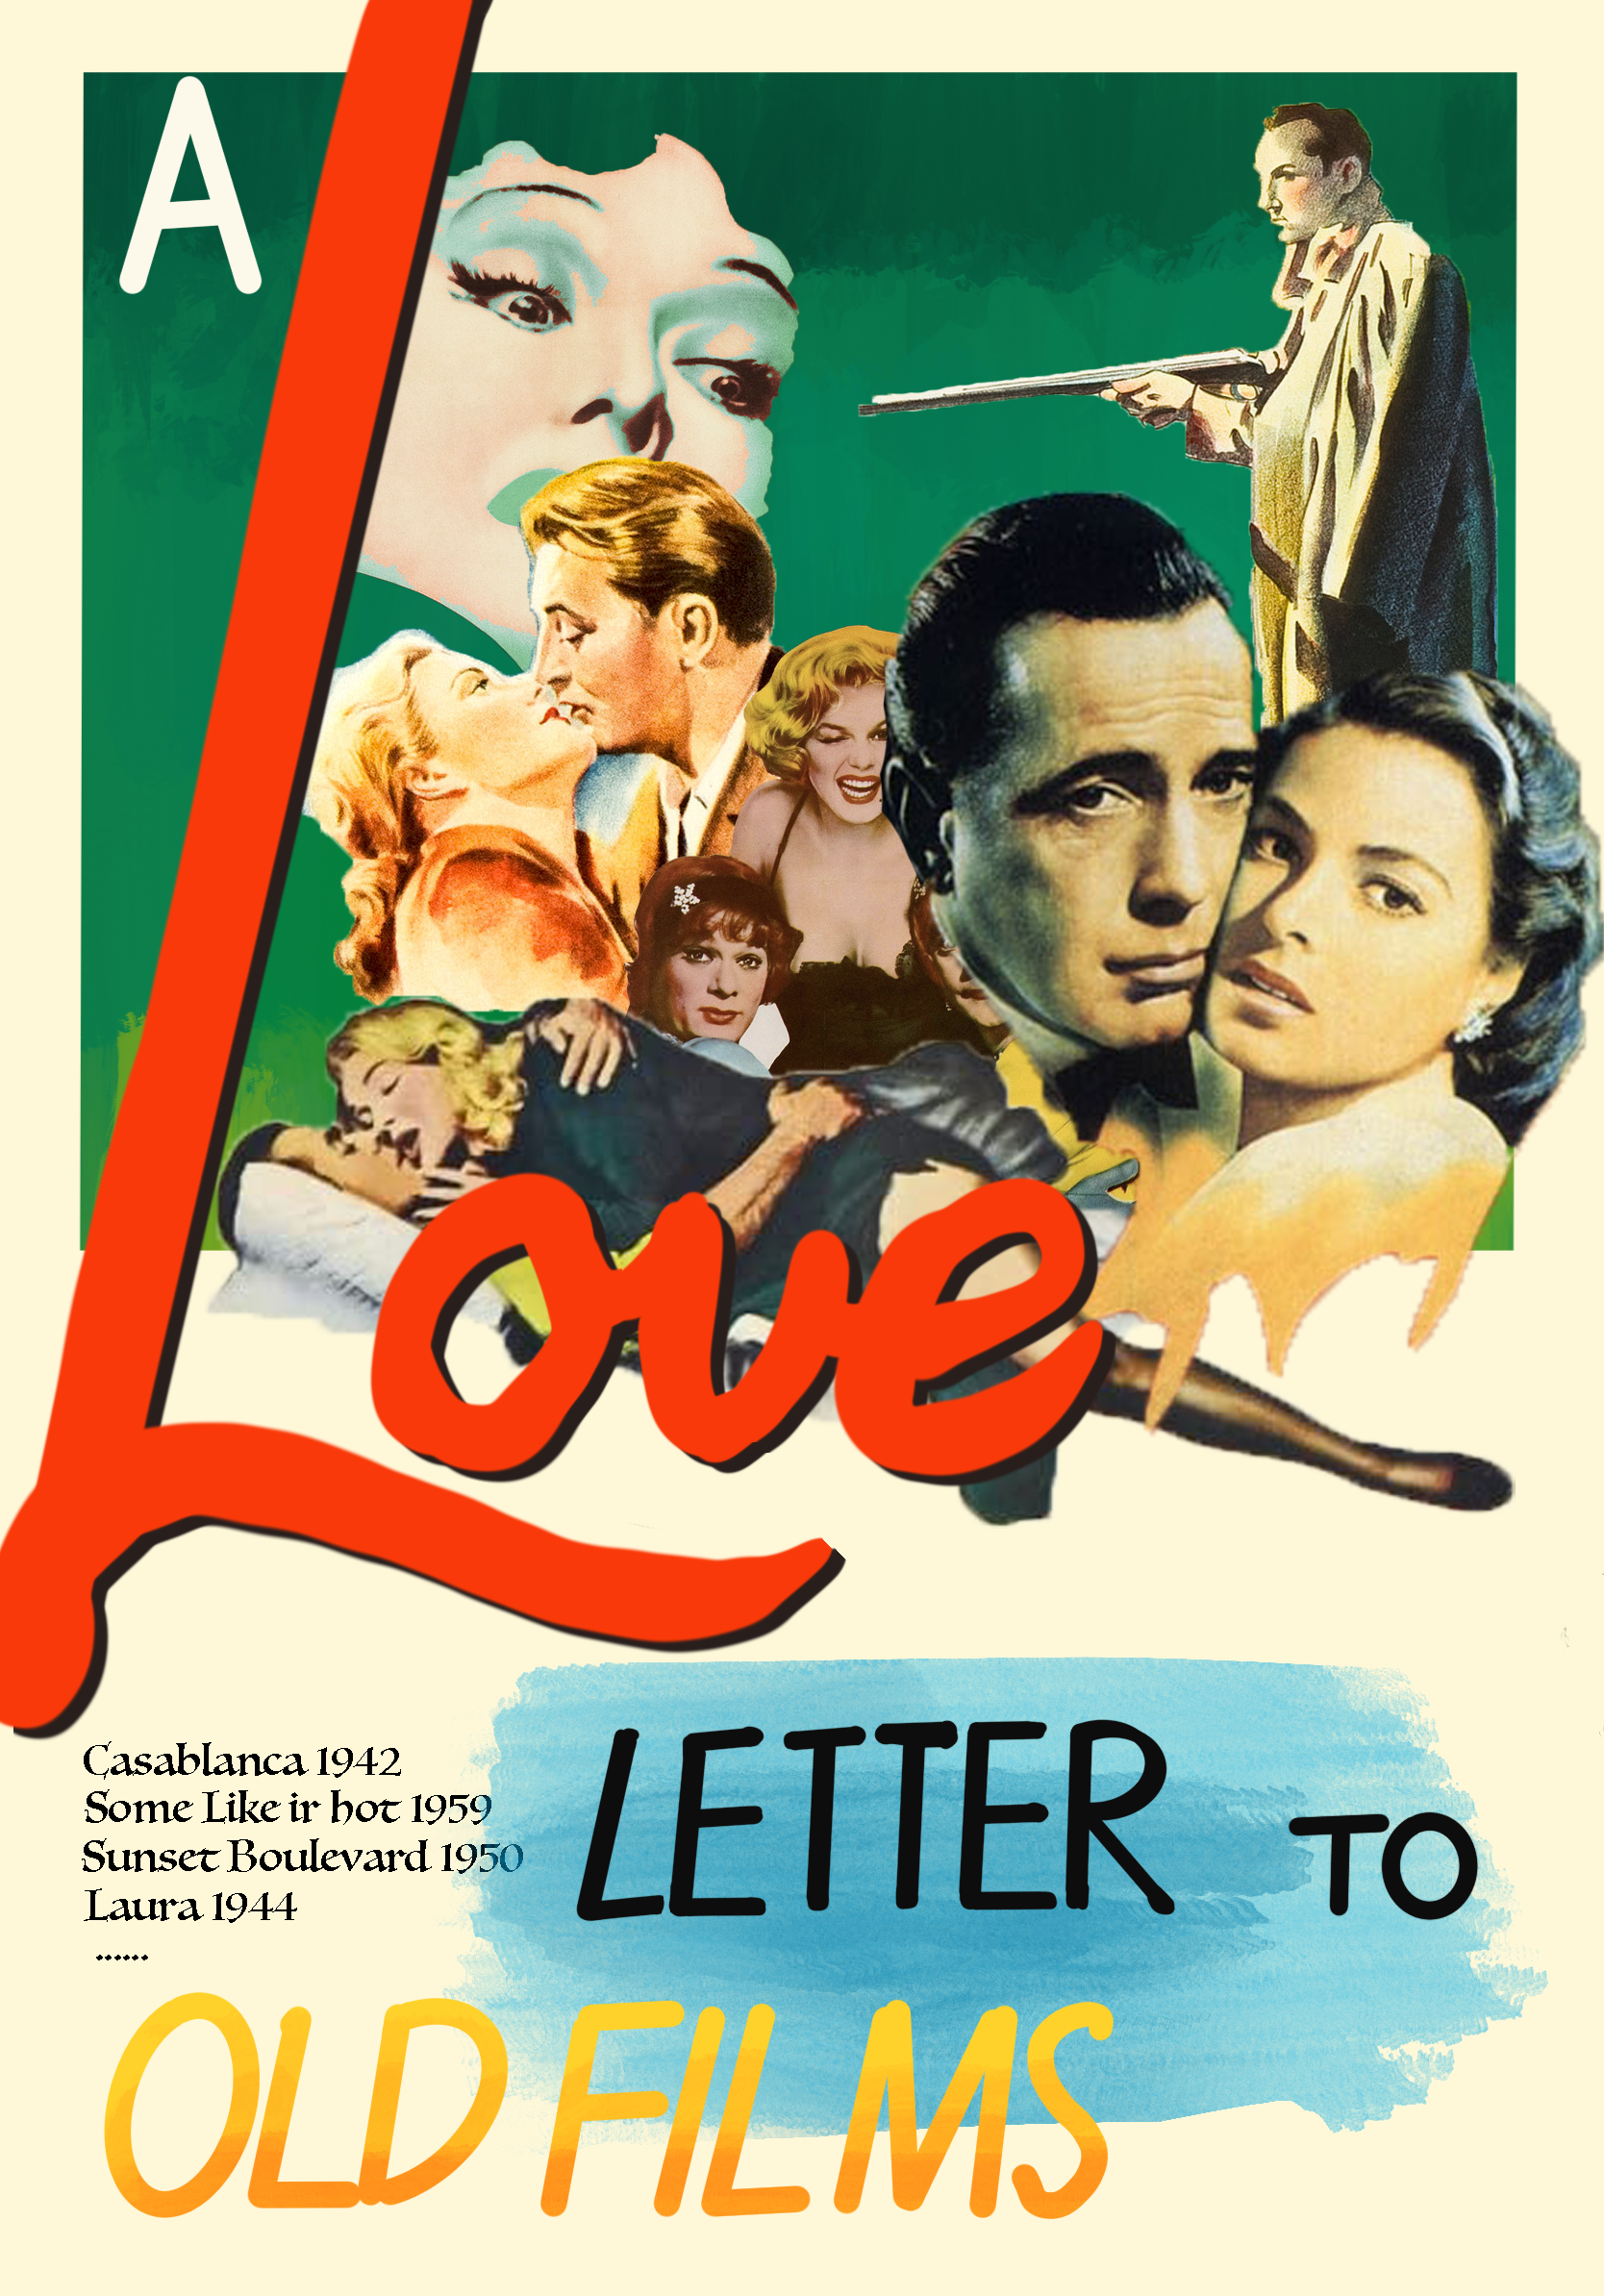 https://thebeaverlse.co.uk/wp-content/uploads/2023/01/love-letter-to-old-films-illustrated-by-XI-CHEN1.png